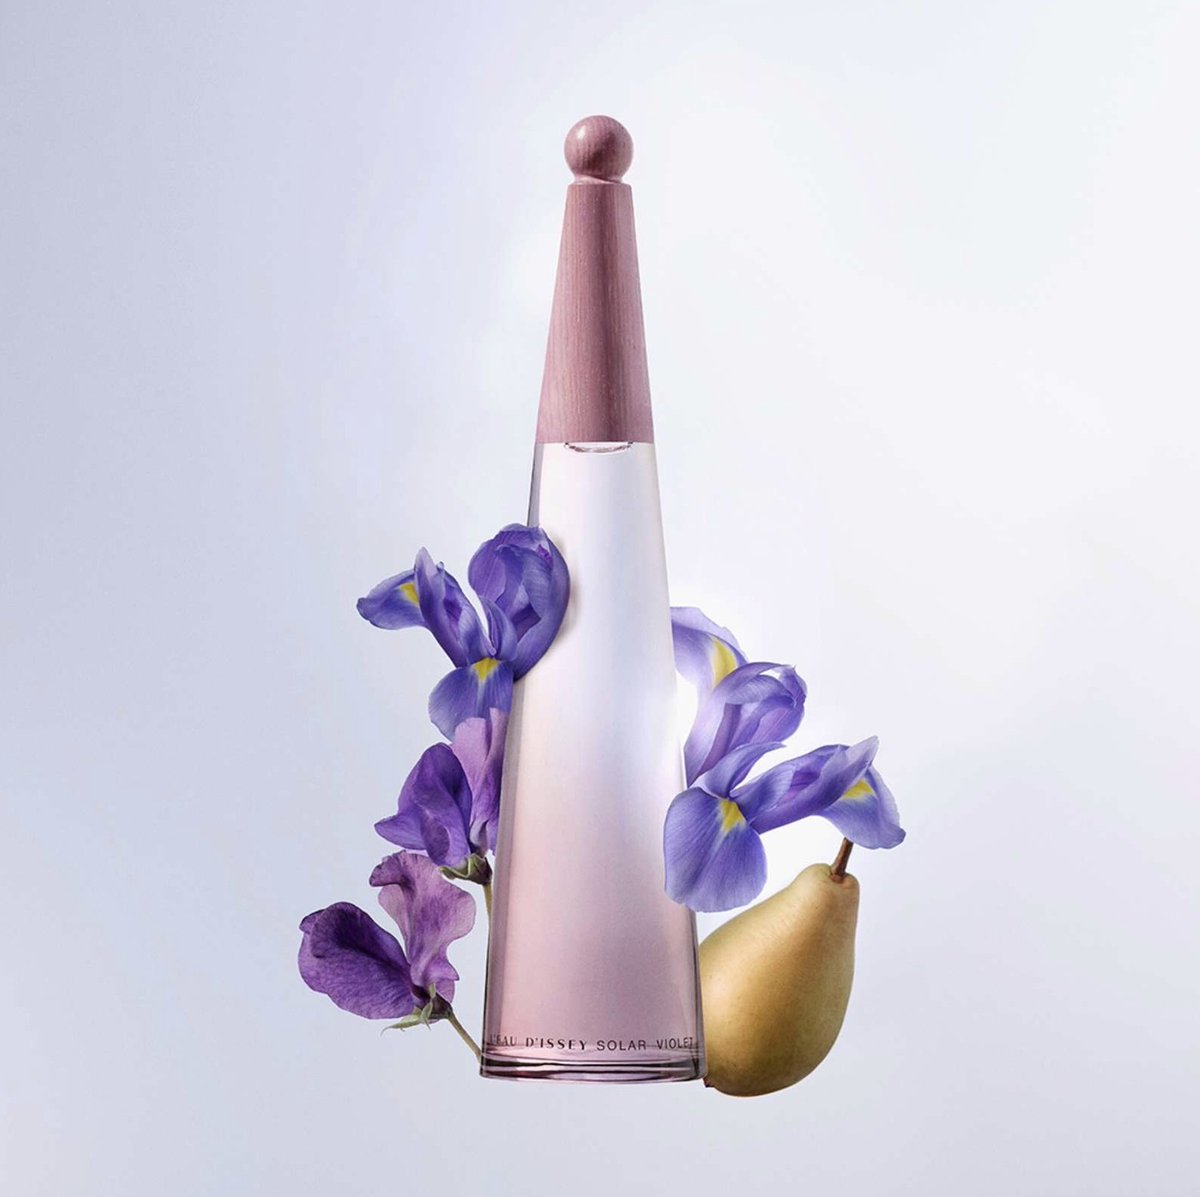 Issey Miyake has just launched one of the most beautiful summer-themed fragrances for her. L'Eau d'Issey Solar Violet that blends juicy pear, violet leaf, silky iris, warm solar notes and aquatic ingredients. Beautifully blended.